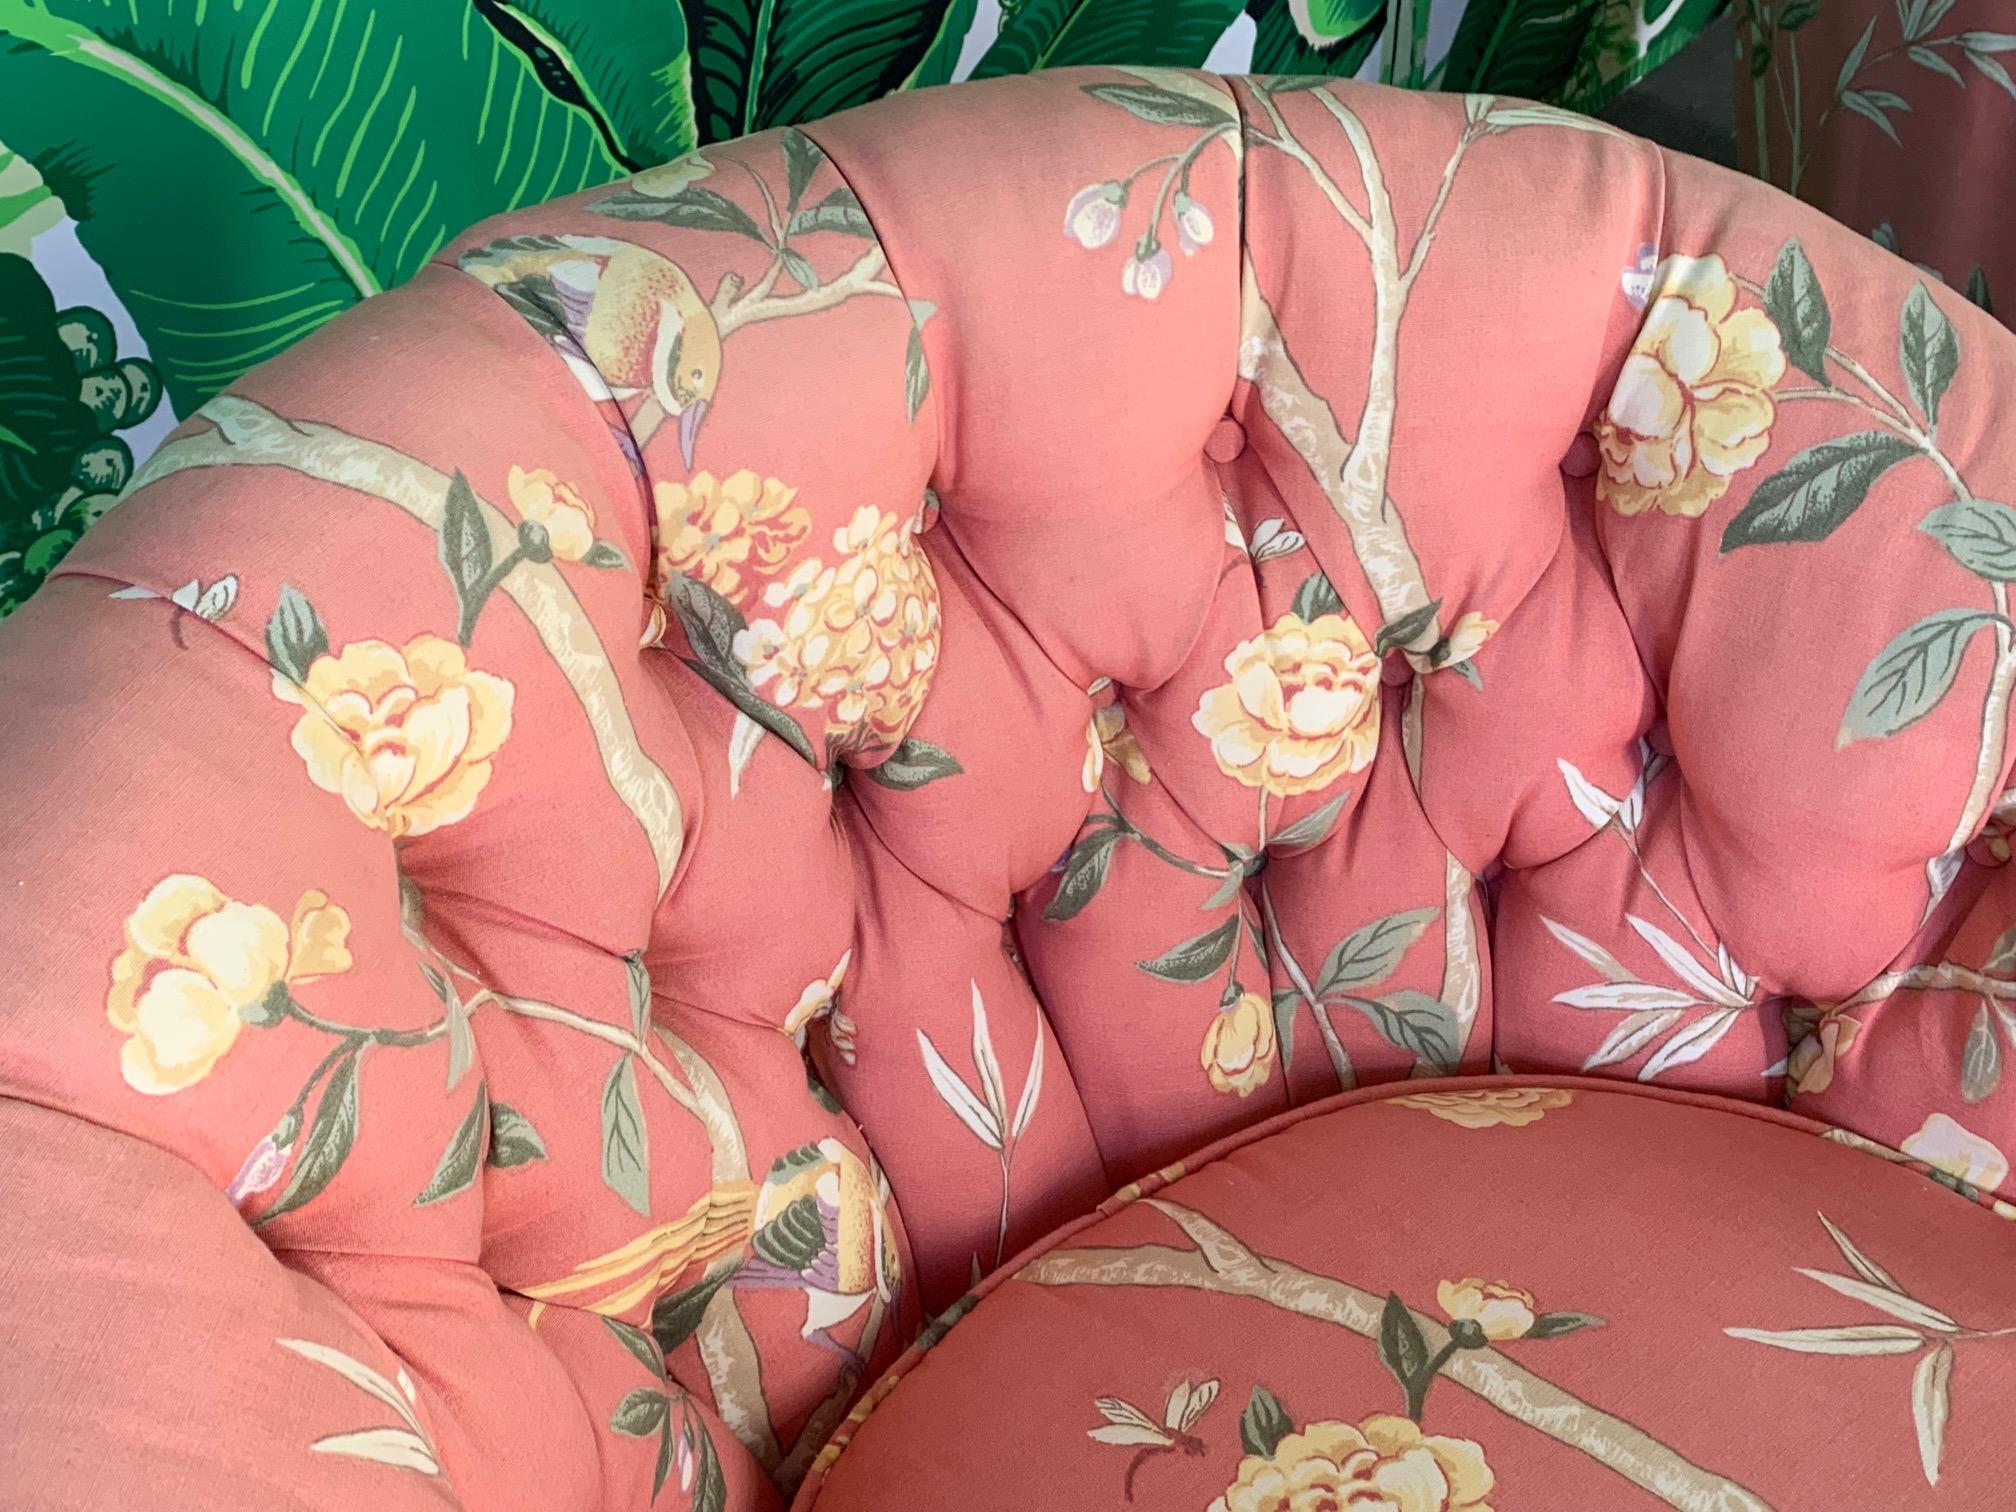 Pair of upholstered swivel club chairs in a vibrant floral motif. Very good condition with no stains or rips, only very slight fading along tops.